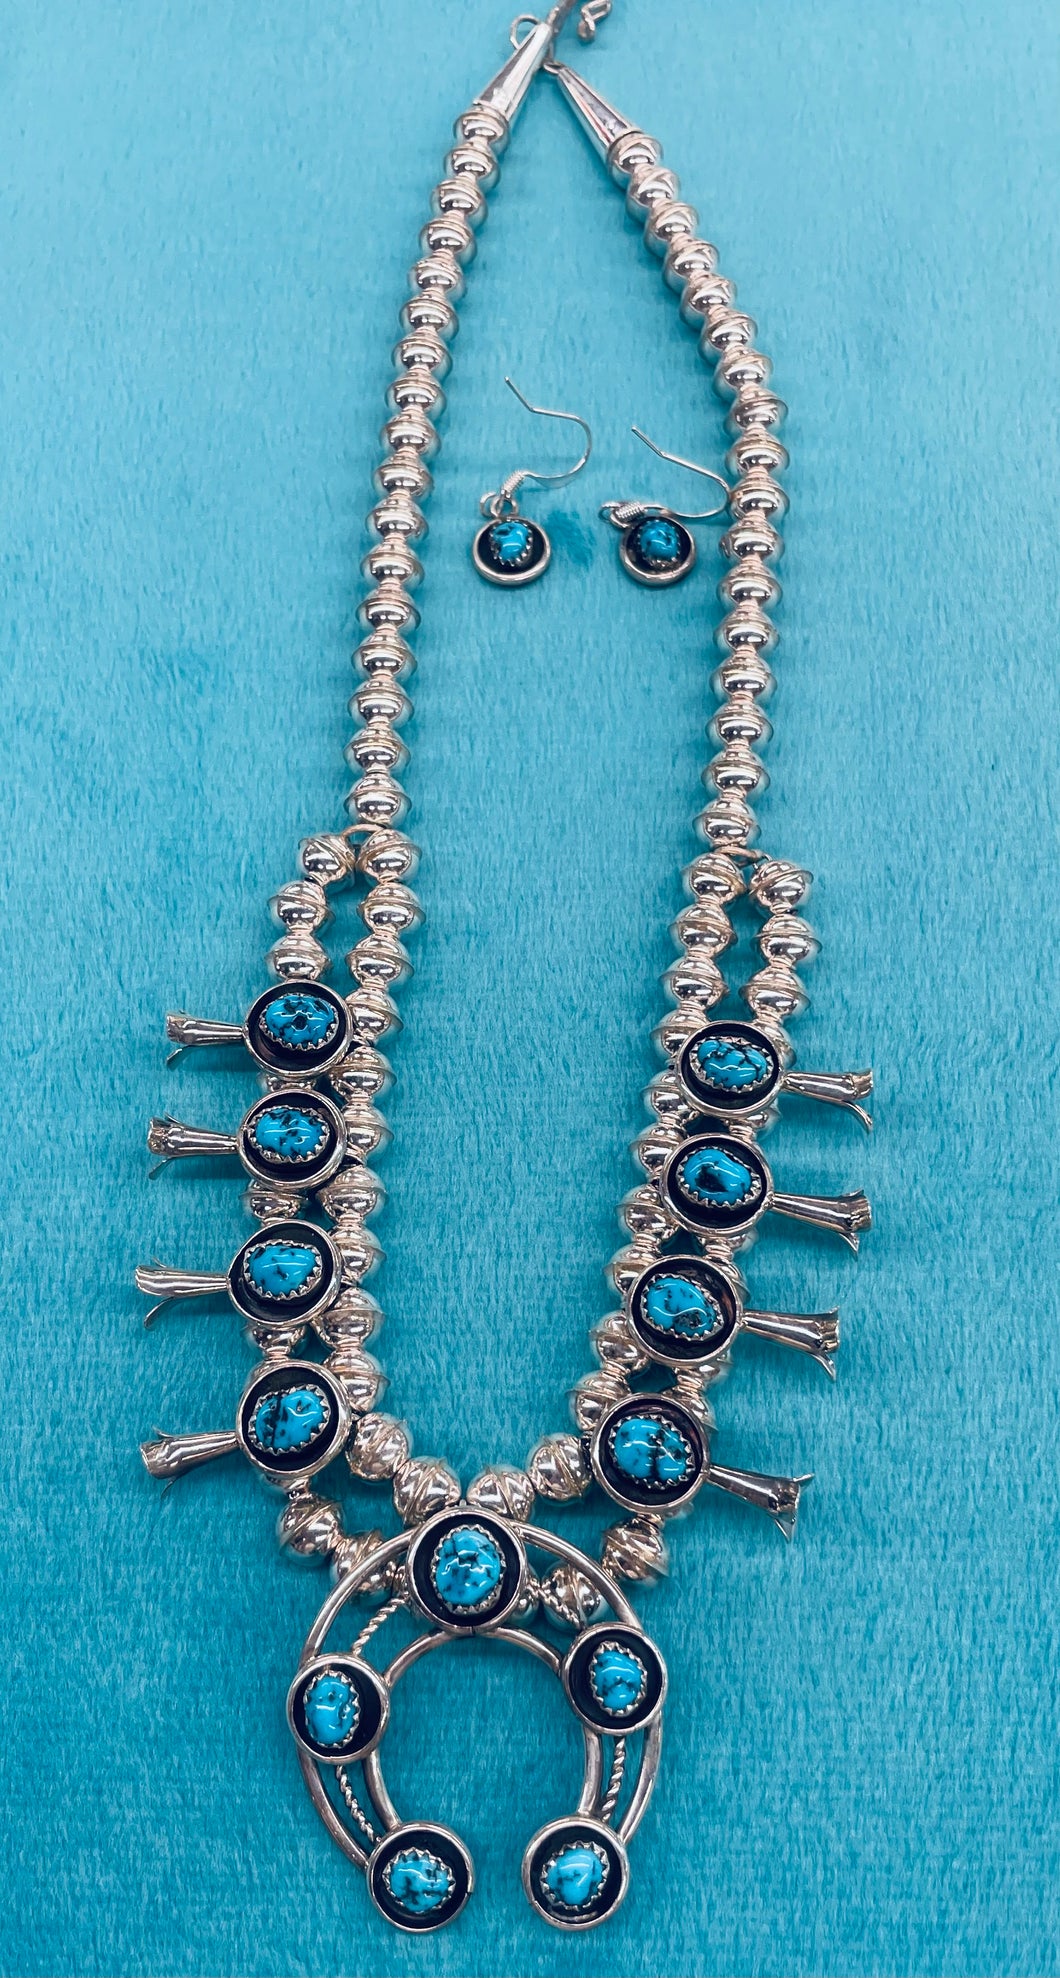 Turquoise and Silver Squash Blossom Necklace and Earrings Set